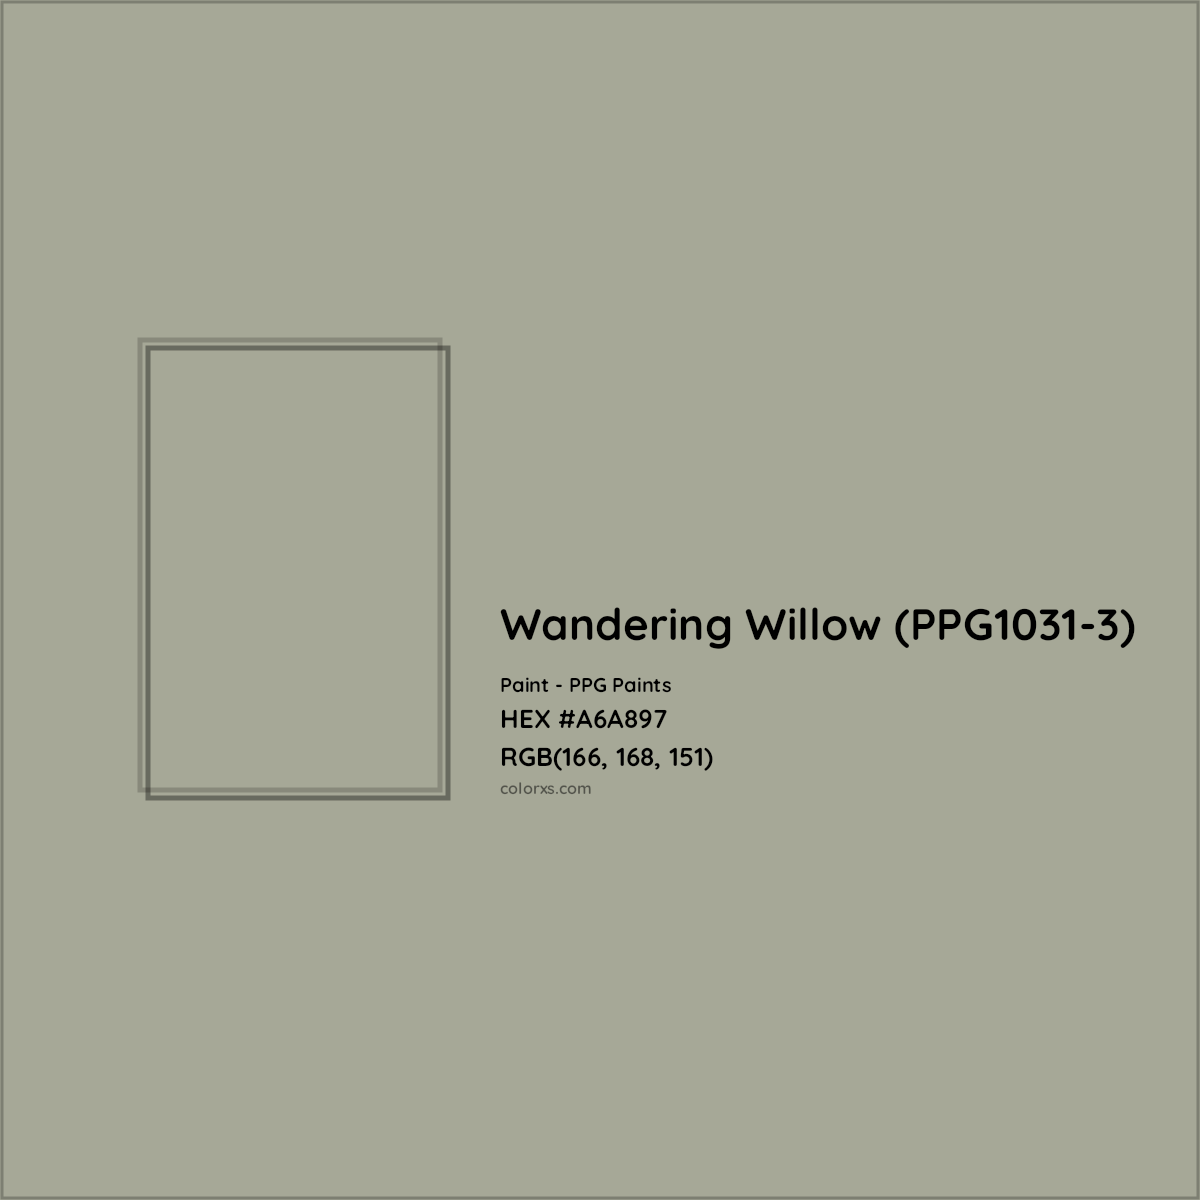 HEX #A6A897 Wandering Willow (PPG1031-3) Paint PPG Paints - Color Code